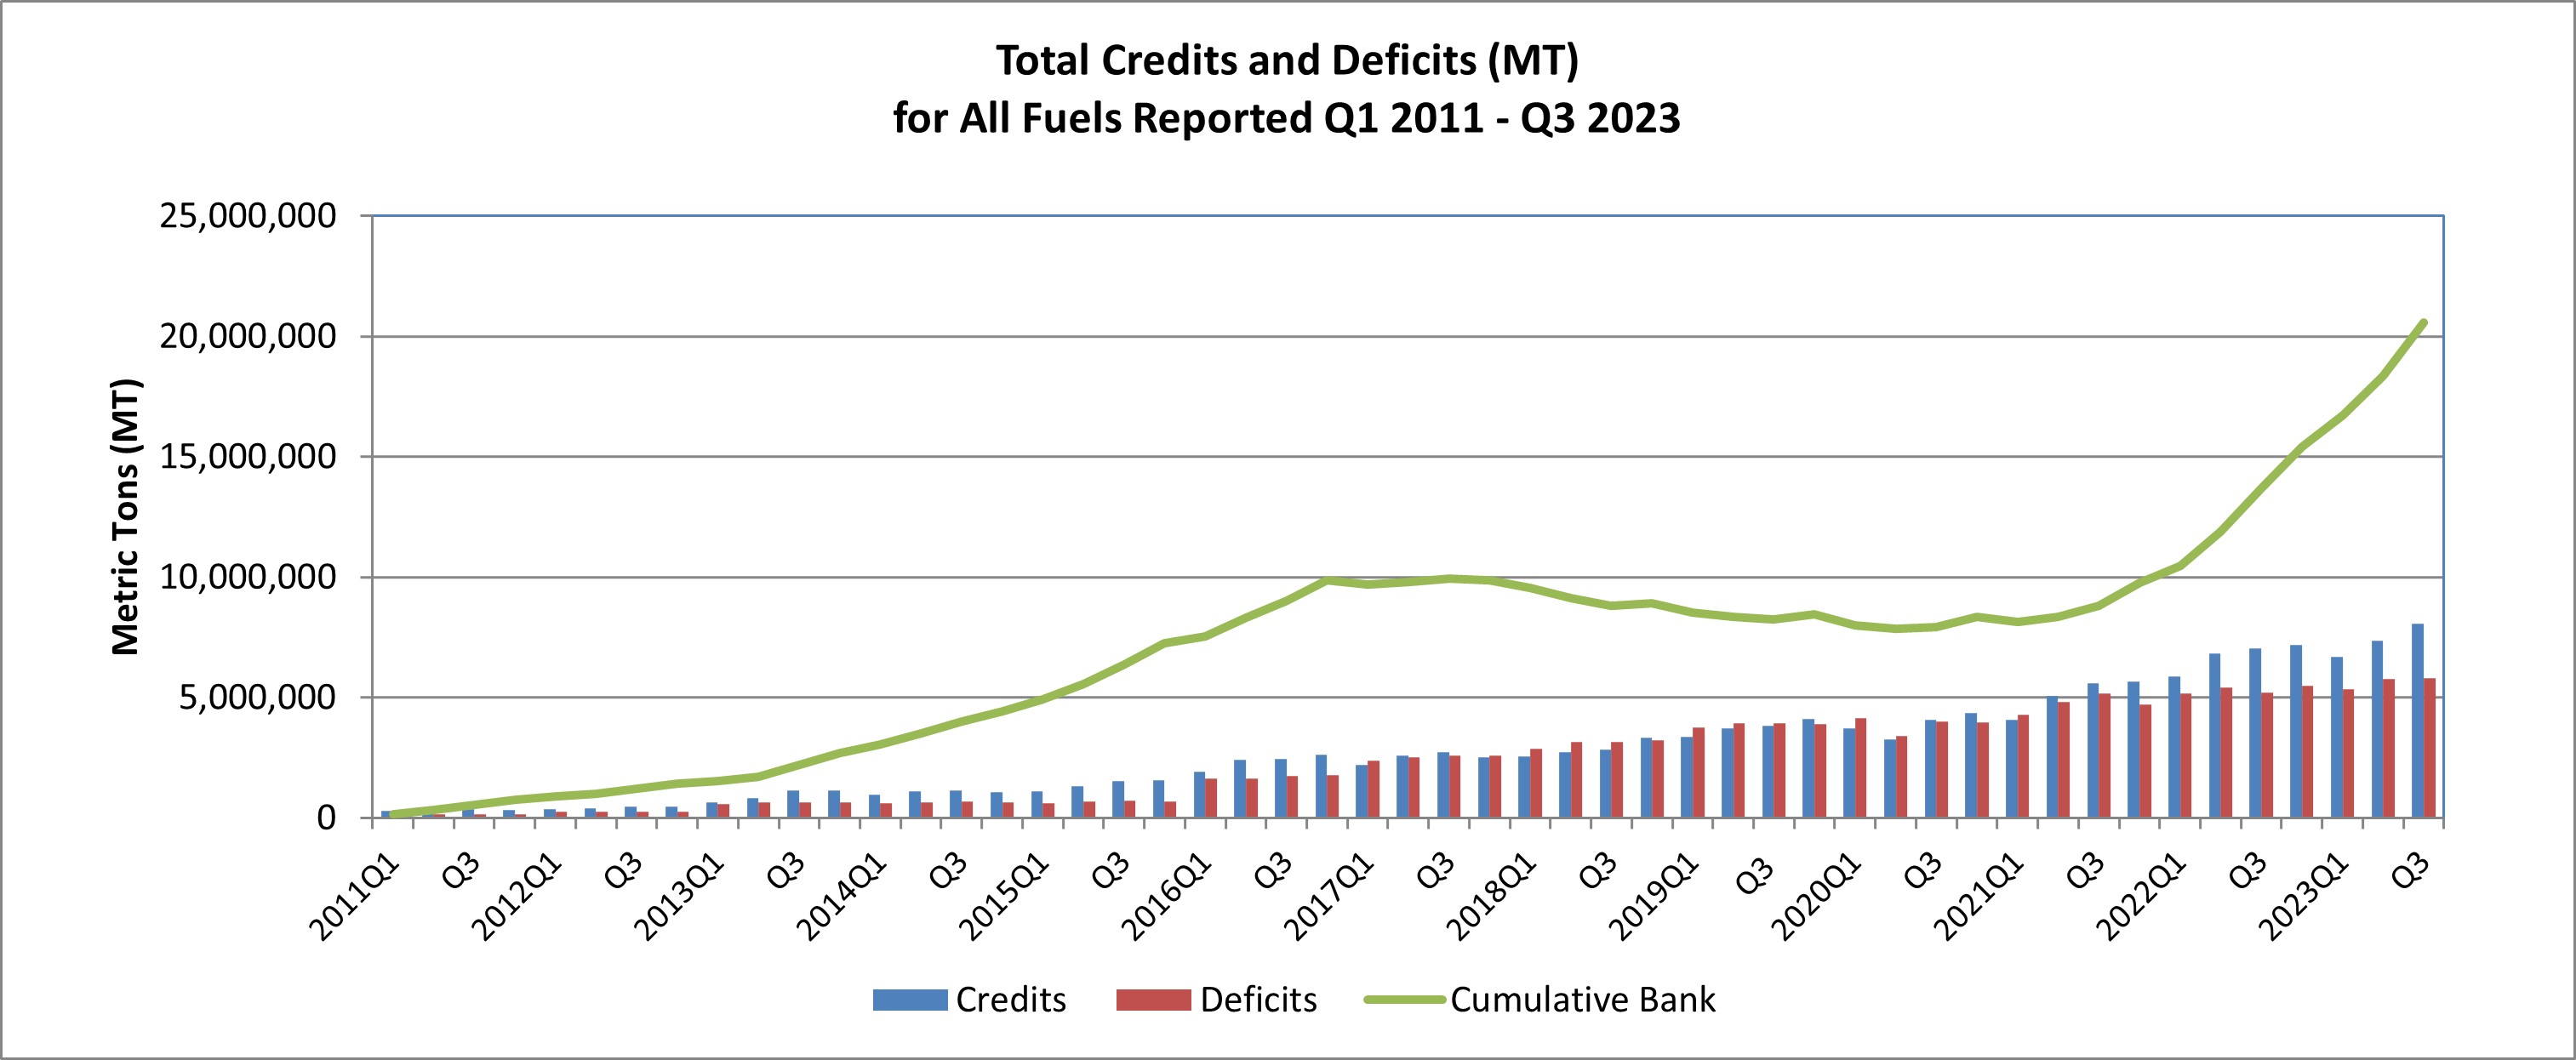 This chart shows the total deficits (in red) and credits (blue) generated during each quarter.  The green line tracks the total number of banked credits.  Regulated entities have consistently over-complied with the standard, generating a bank of credits which can be sold or retired to meet compliance obligations at any time.  At the end of Q1 2023, the bank stood at nearly 16.6 million credits.  No 2022 Low Complexity/Low Energy Use Refining credits have been included as of this publication.  As the standard becomes more stringent in order to reach the targeted reductions by 2030, regulated entities can rely on these banked credits to ease compliance.